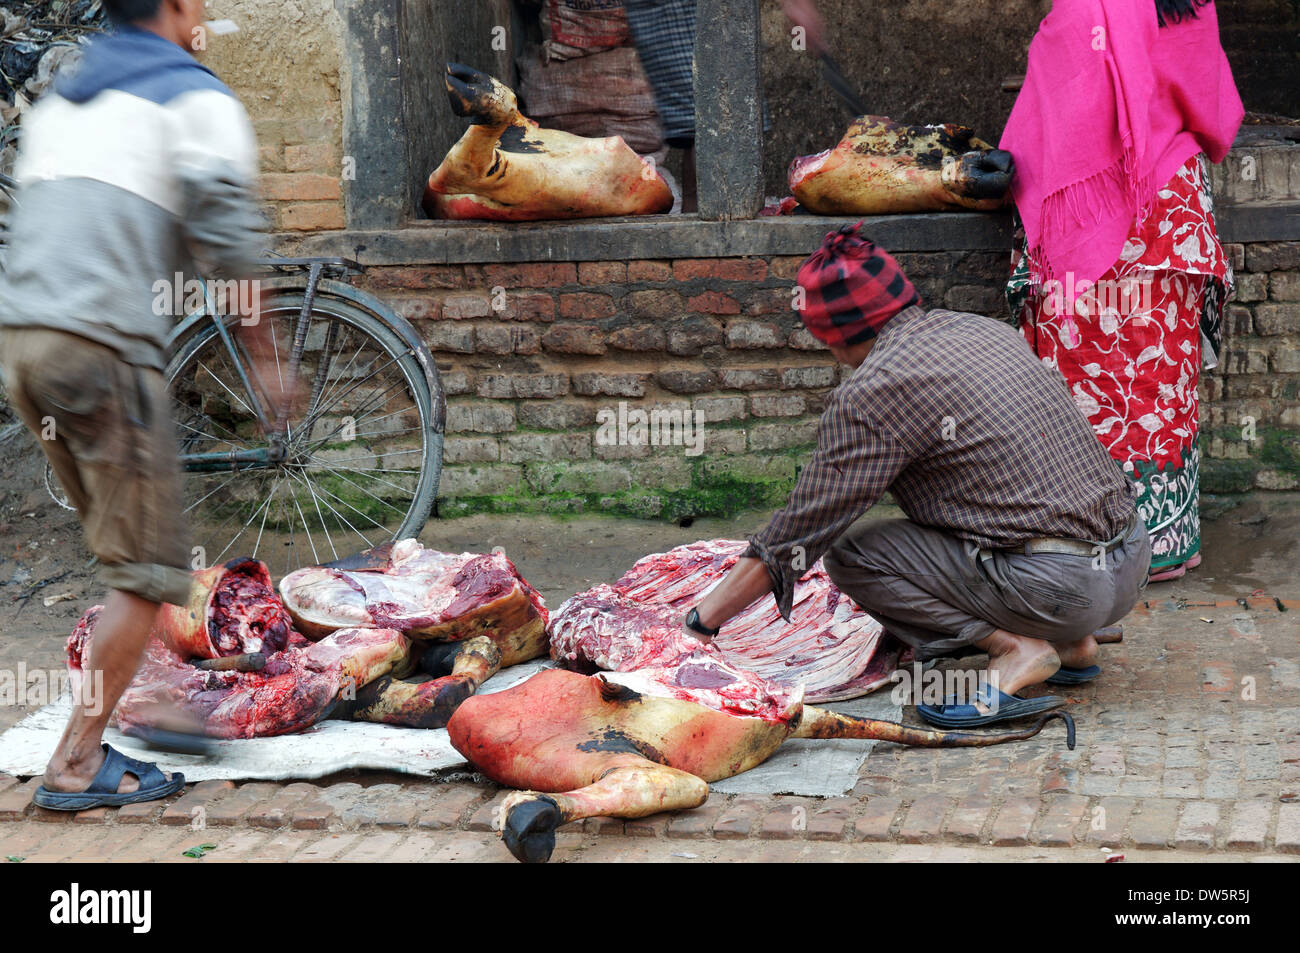 A butcher's stall in a Nepalese market Stock Photo